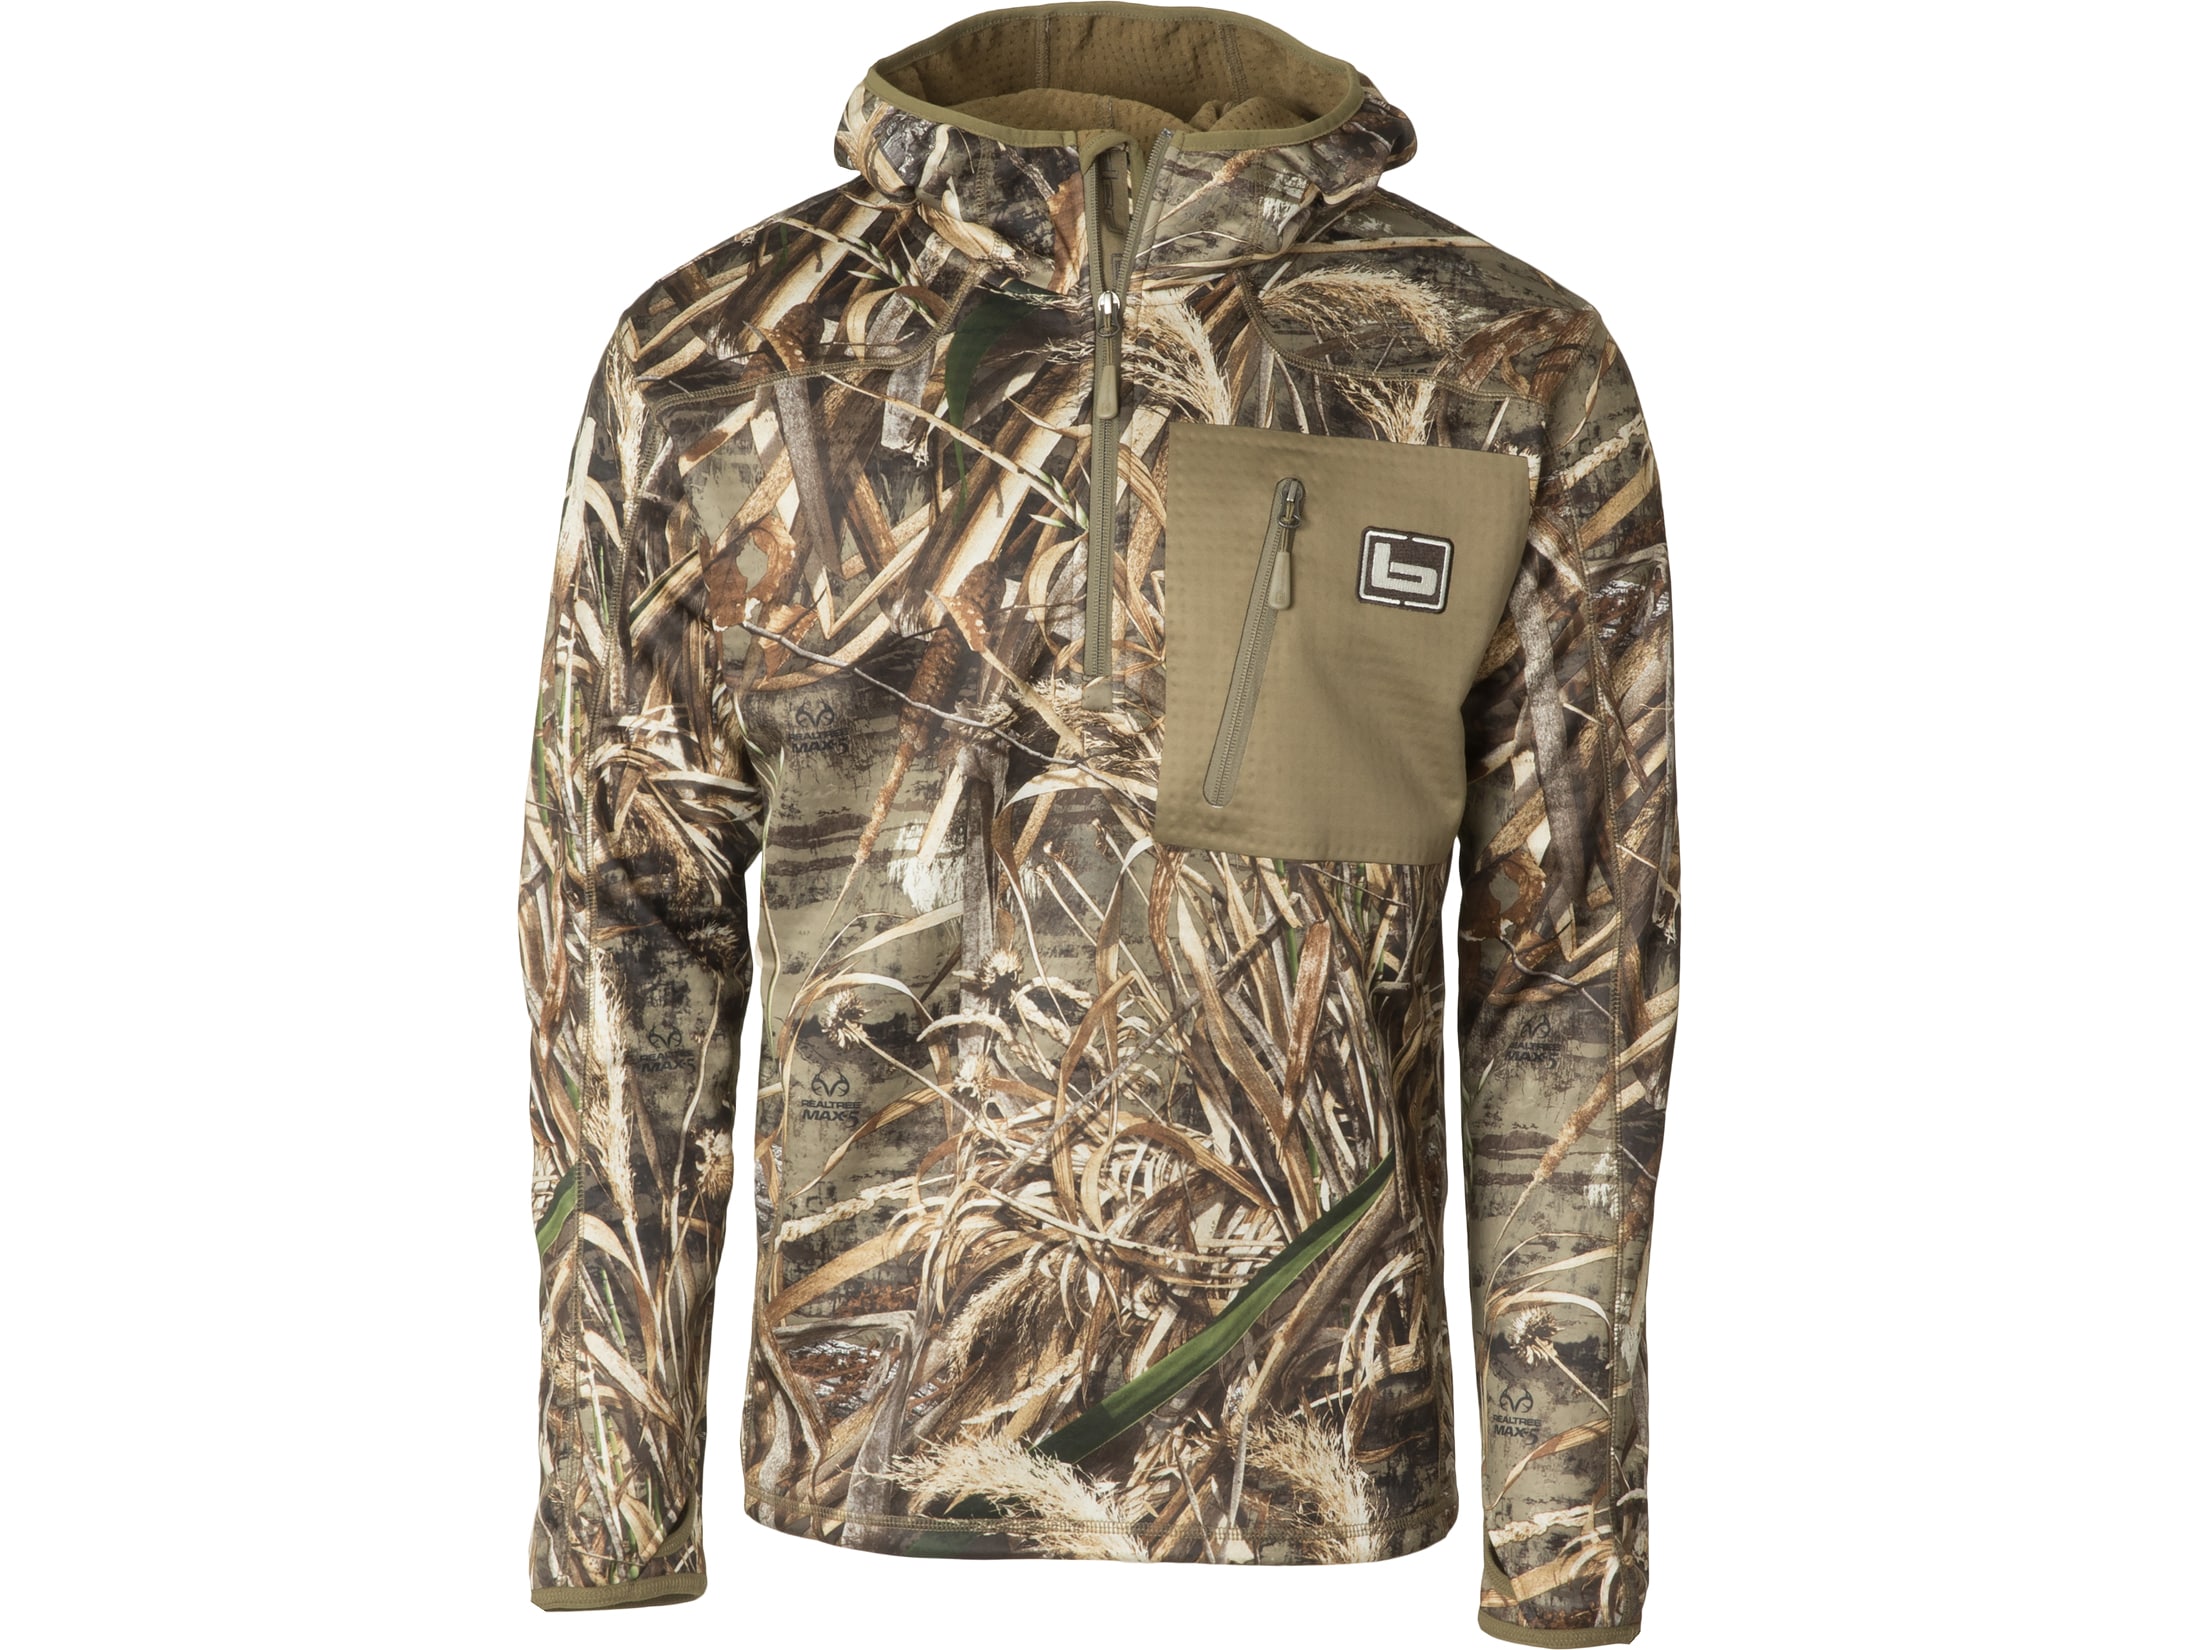 Banded Men's Hooded Mid-Layer Fleece 1/4 Zip Realtree Max-5 Large